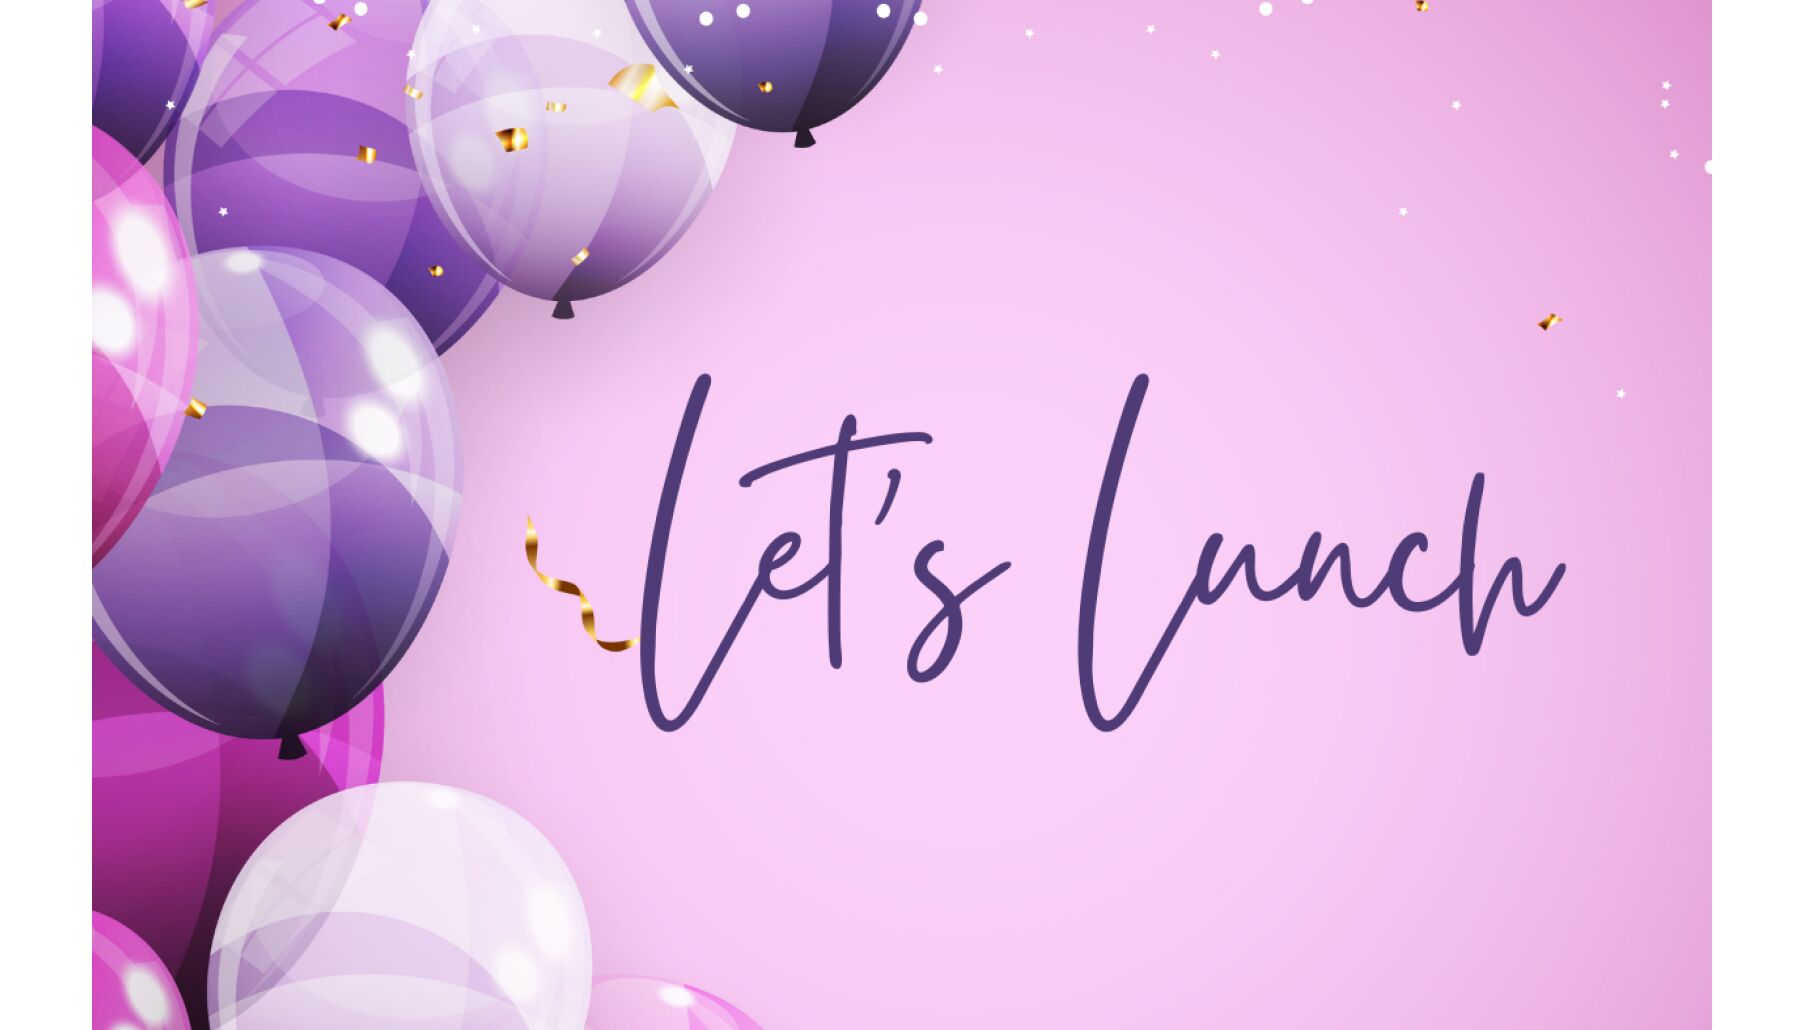 Let's Lunch banner 2